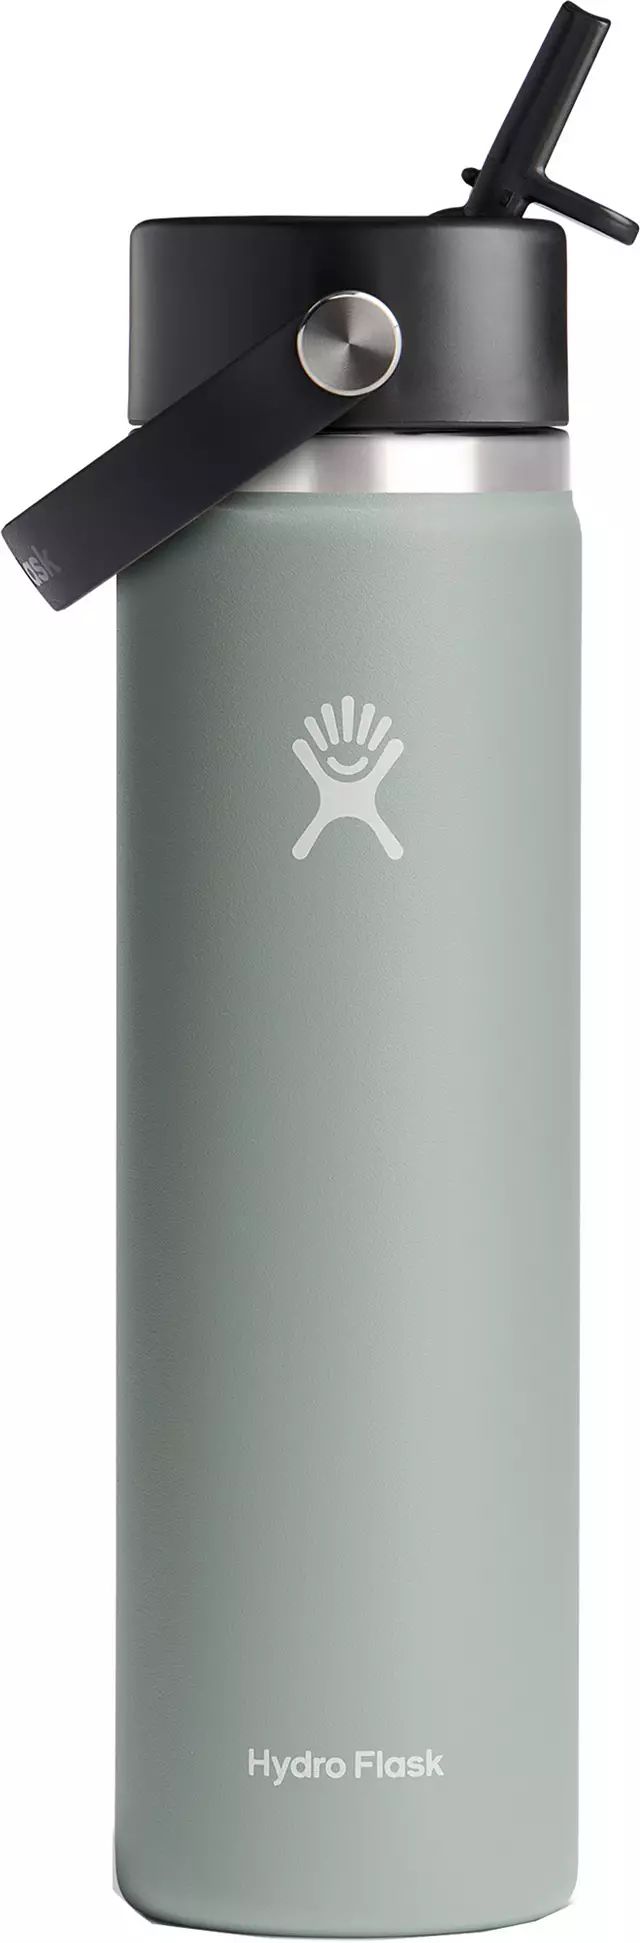 Hydro Flask 24 oz. Wide Mouth Bottle with Flex Straw Cap | Dick's Sporting Goods